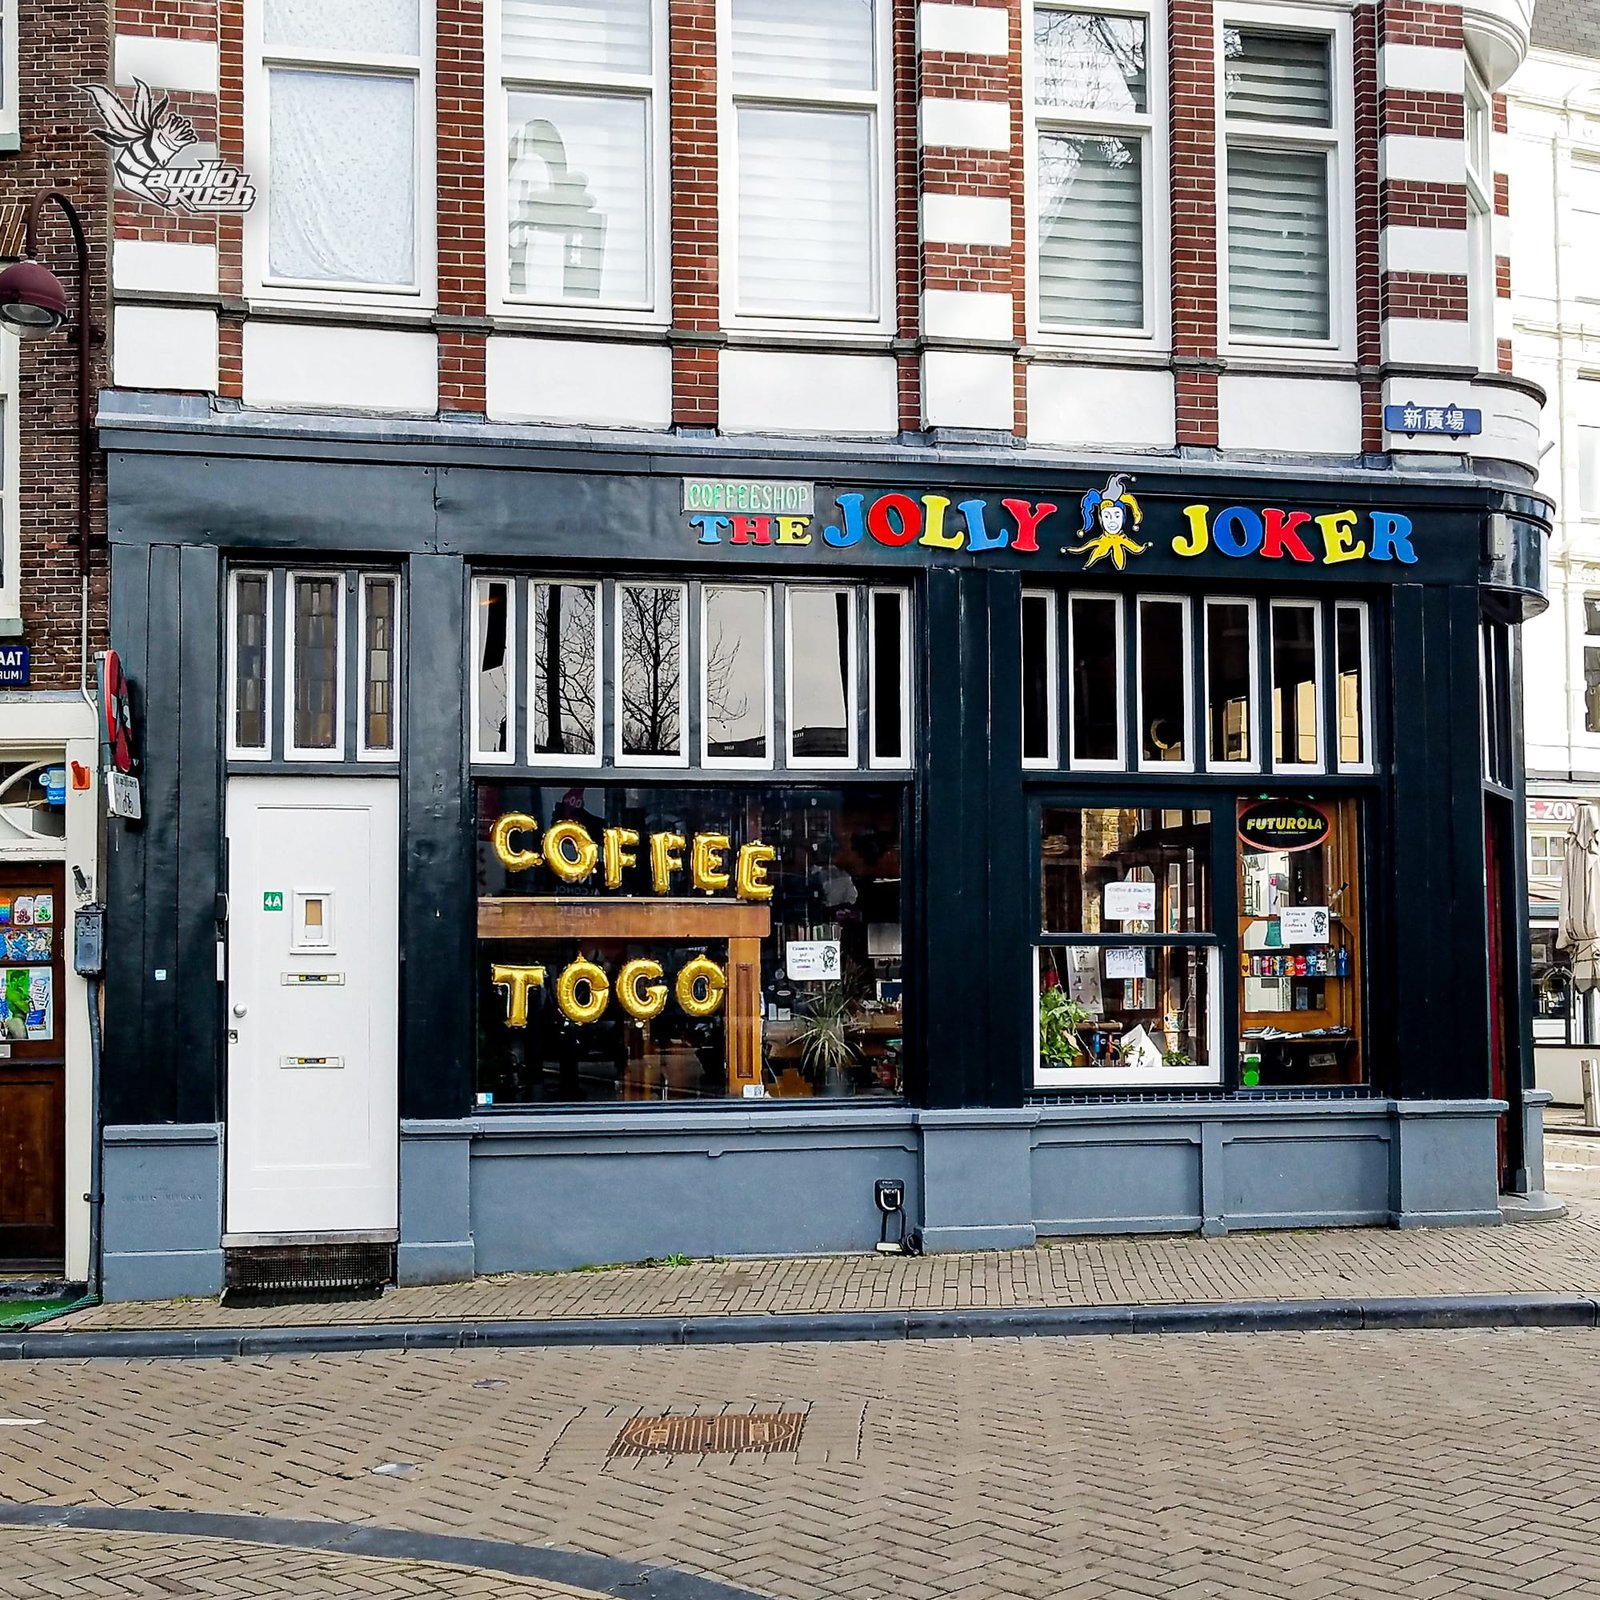 Since mid-October, coffeeshops in the Netherlands have remained open for take-away only options.